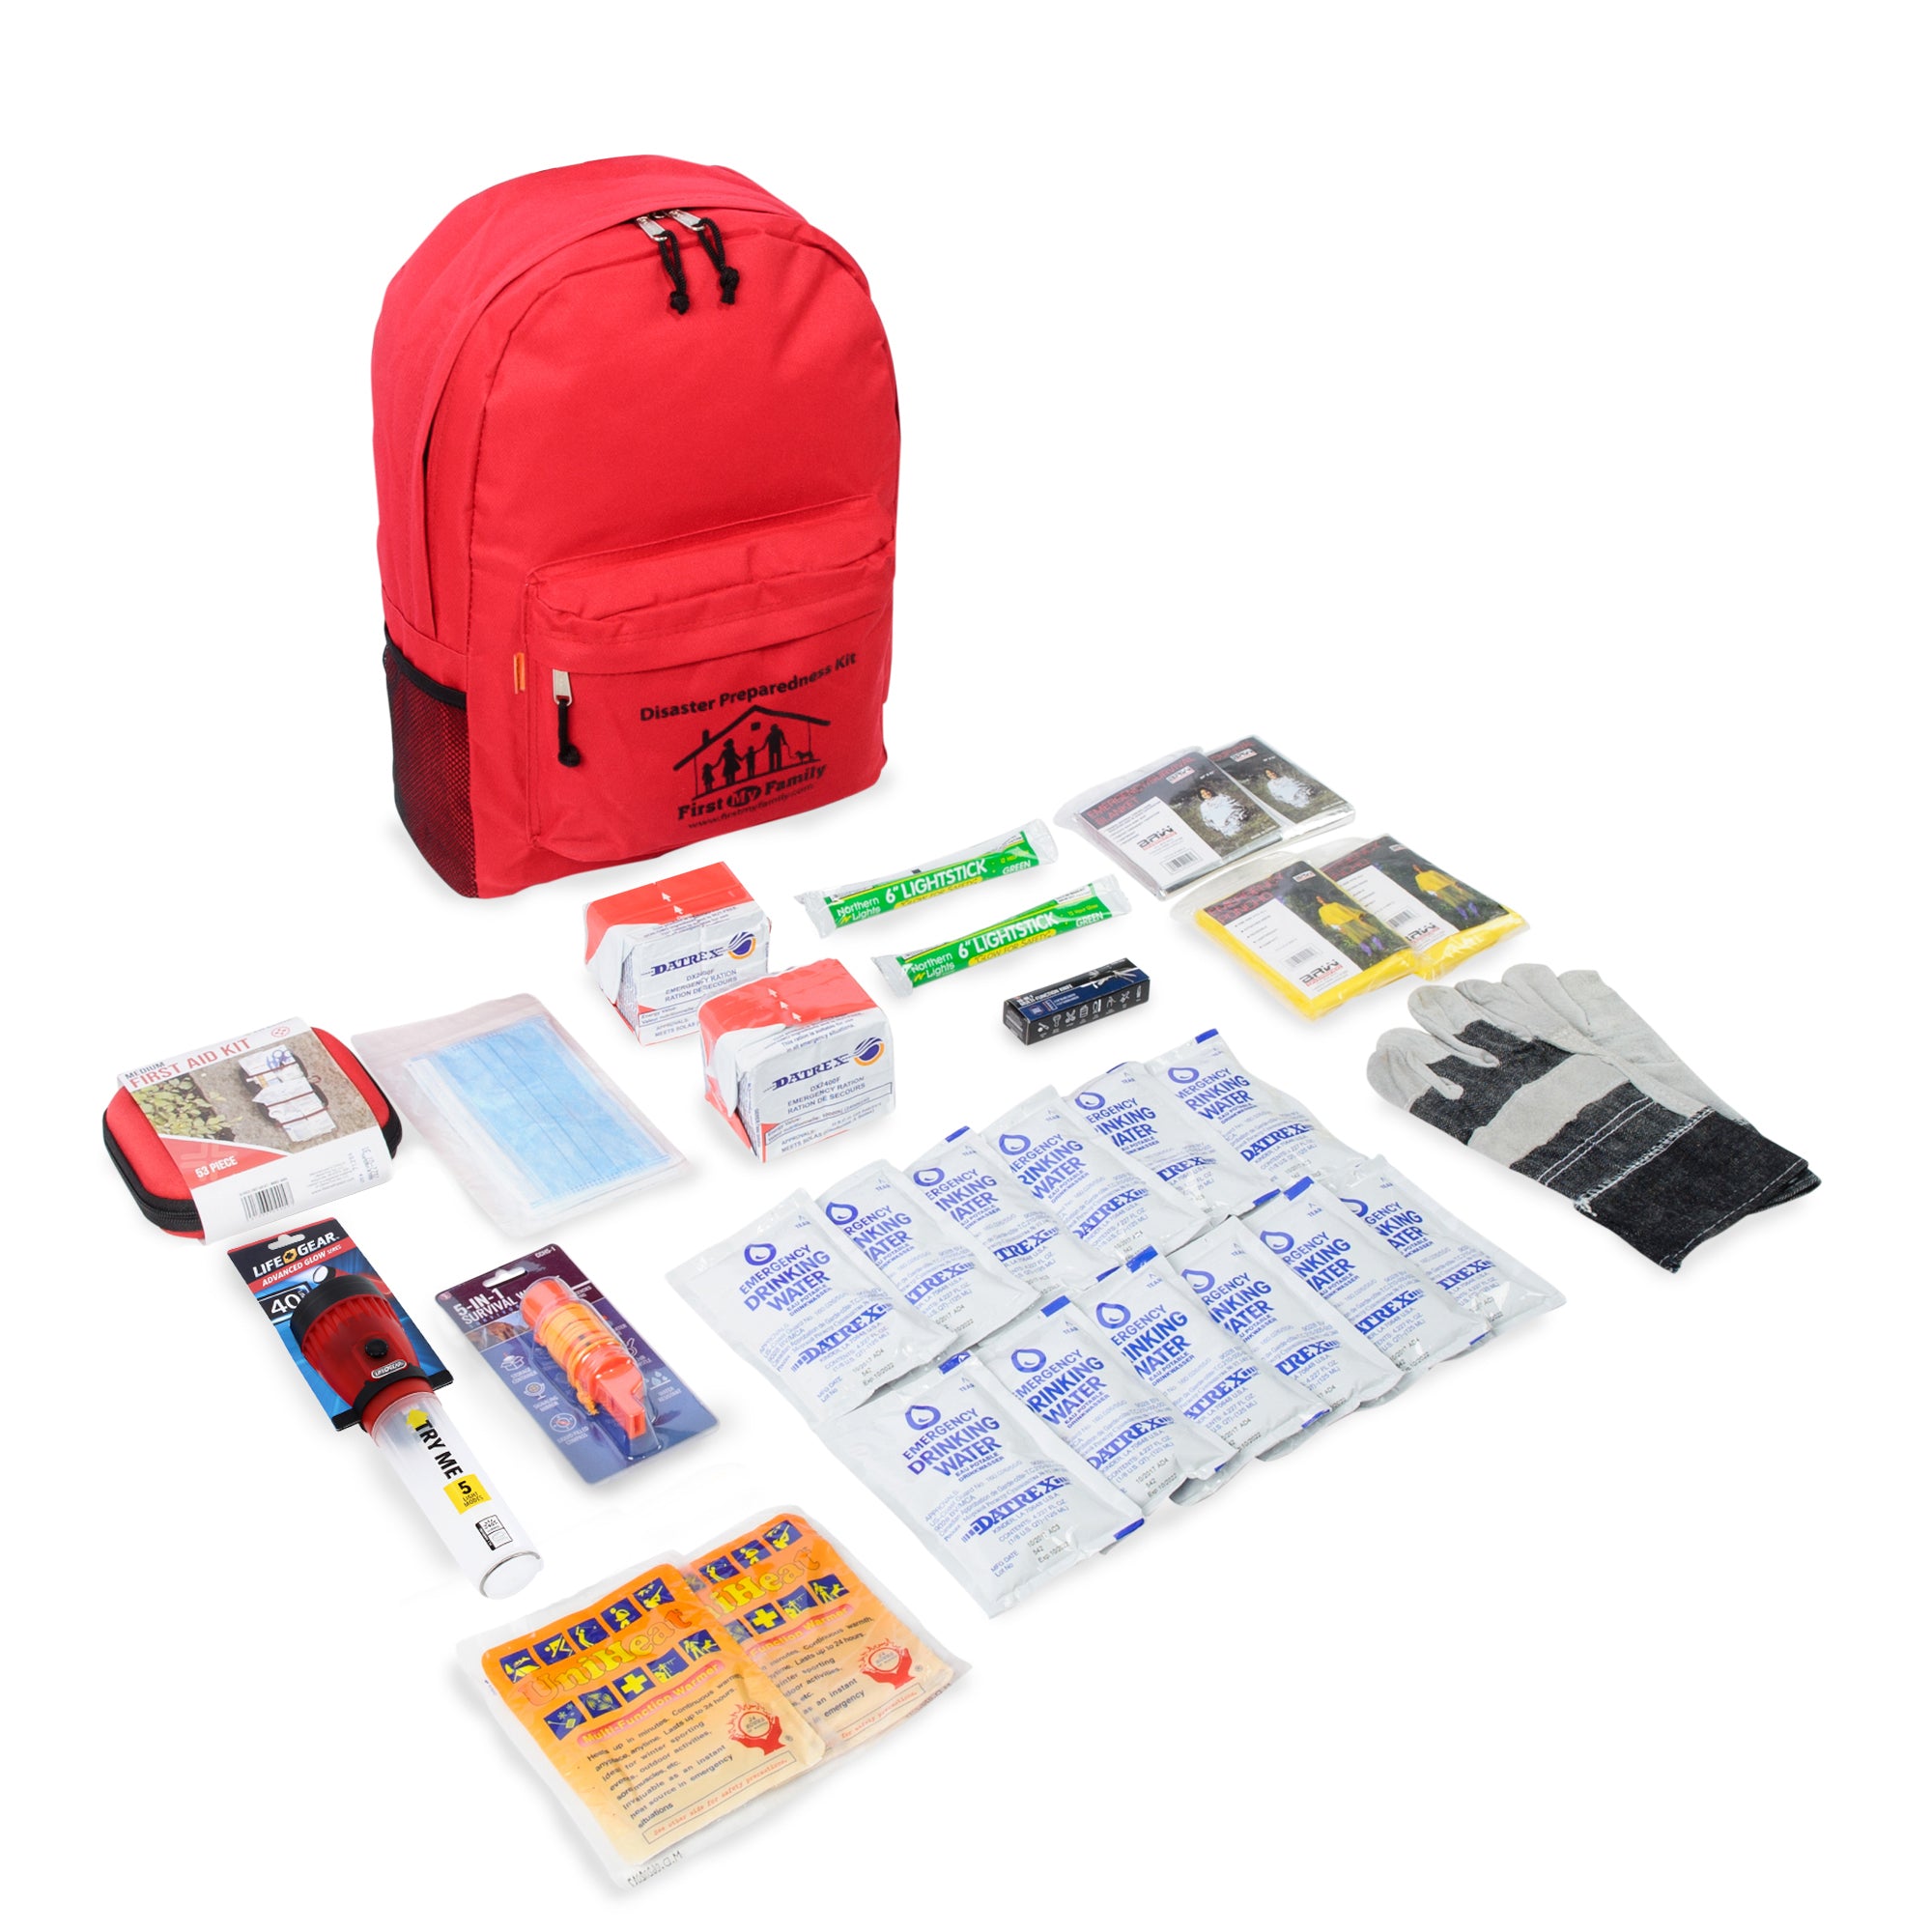 Get Prepared: What To Put In Your Earthquake Kit - Savvy Tokyo